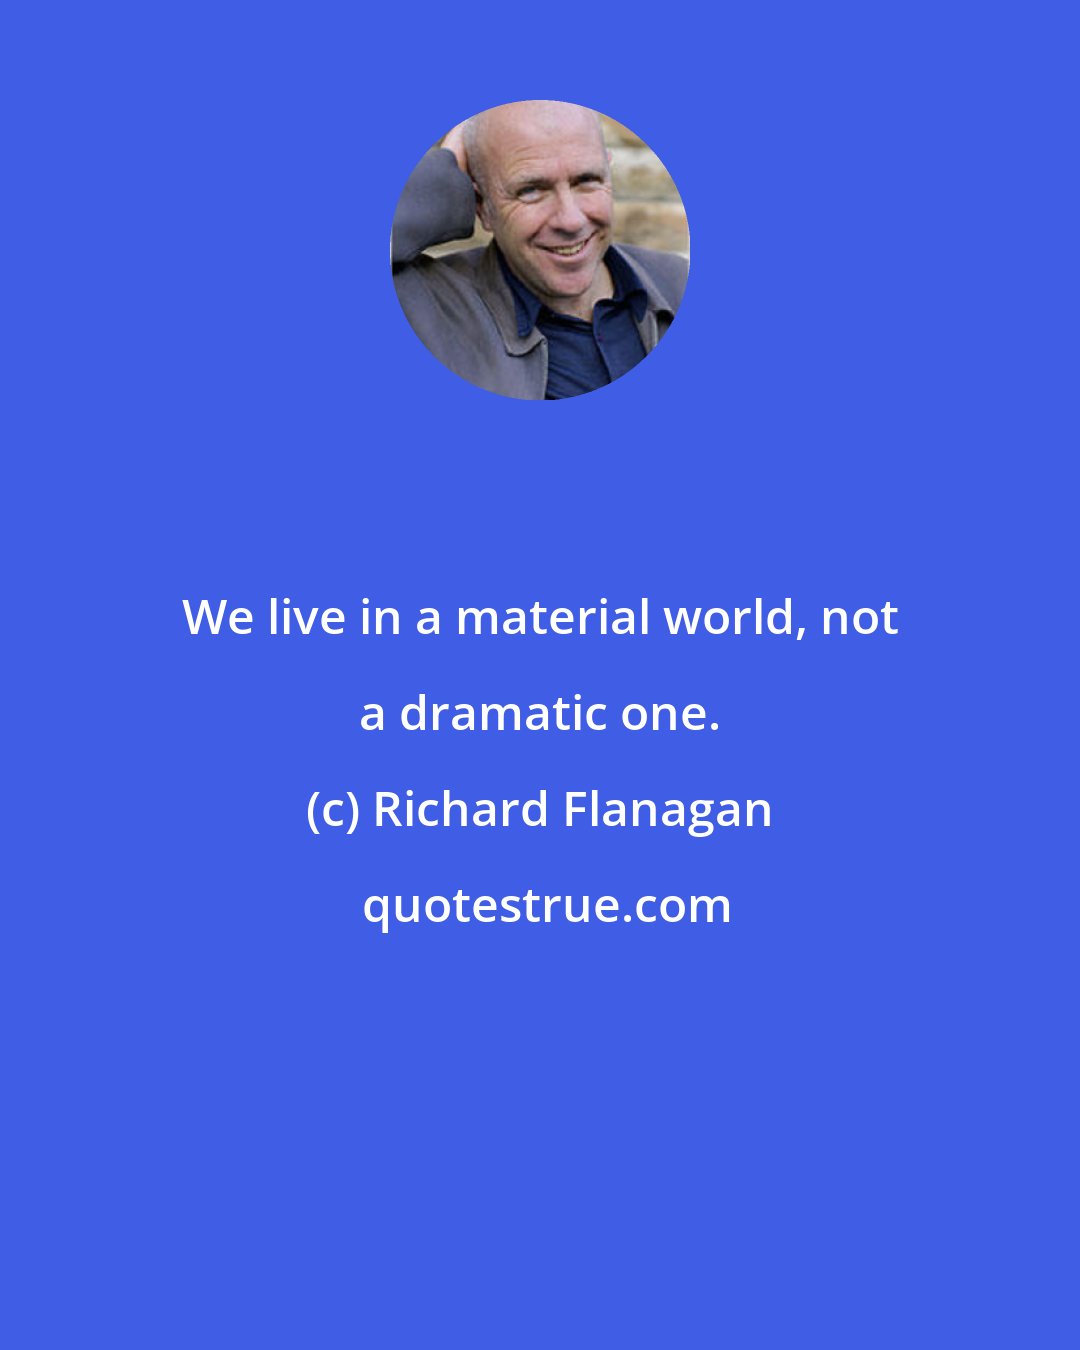 Richard Flanagan: We live in a material world, not a dramatic one.